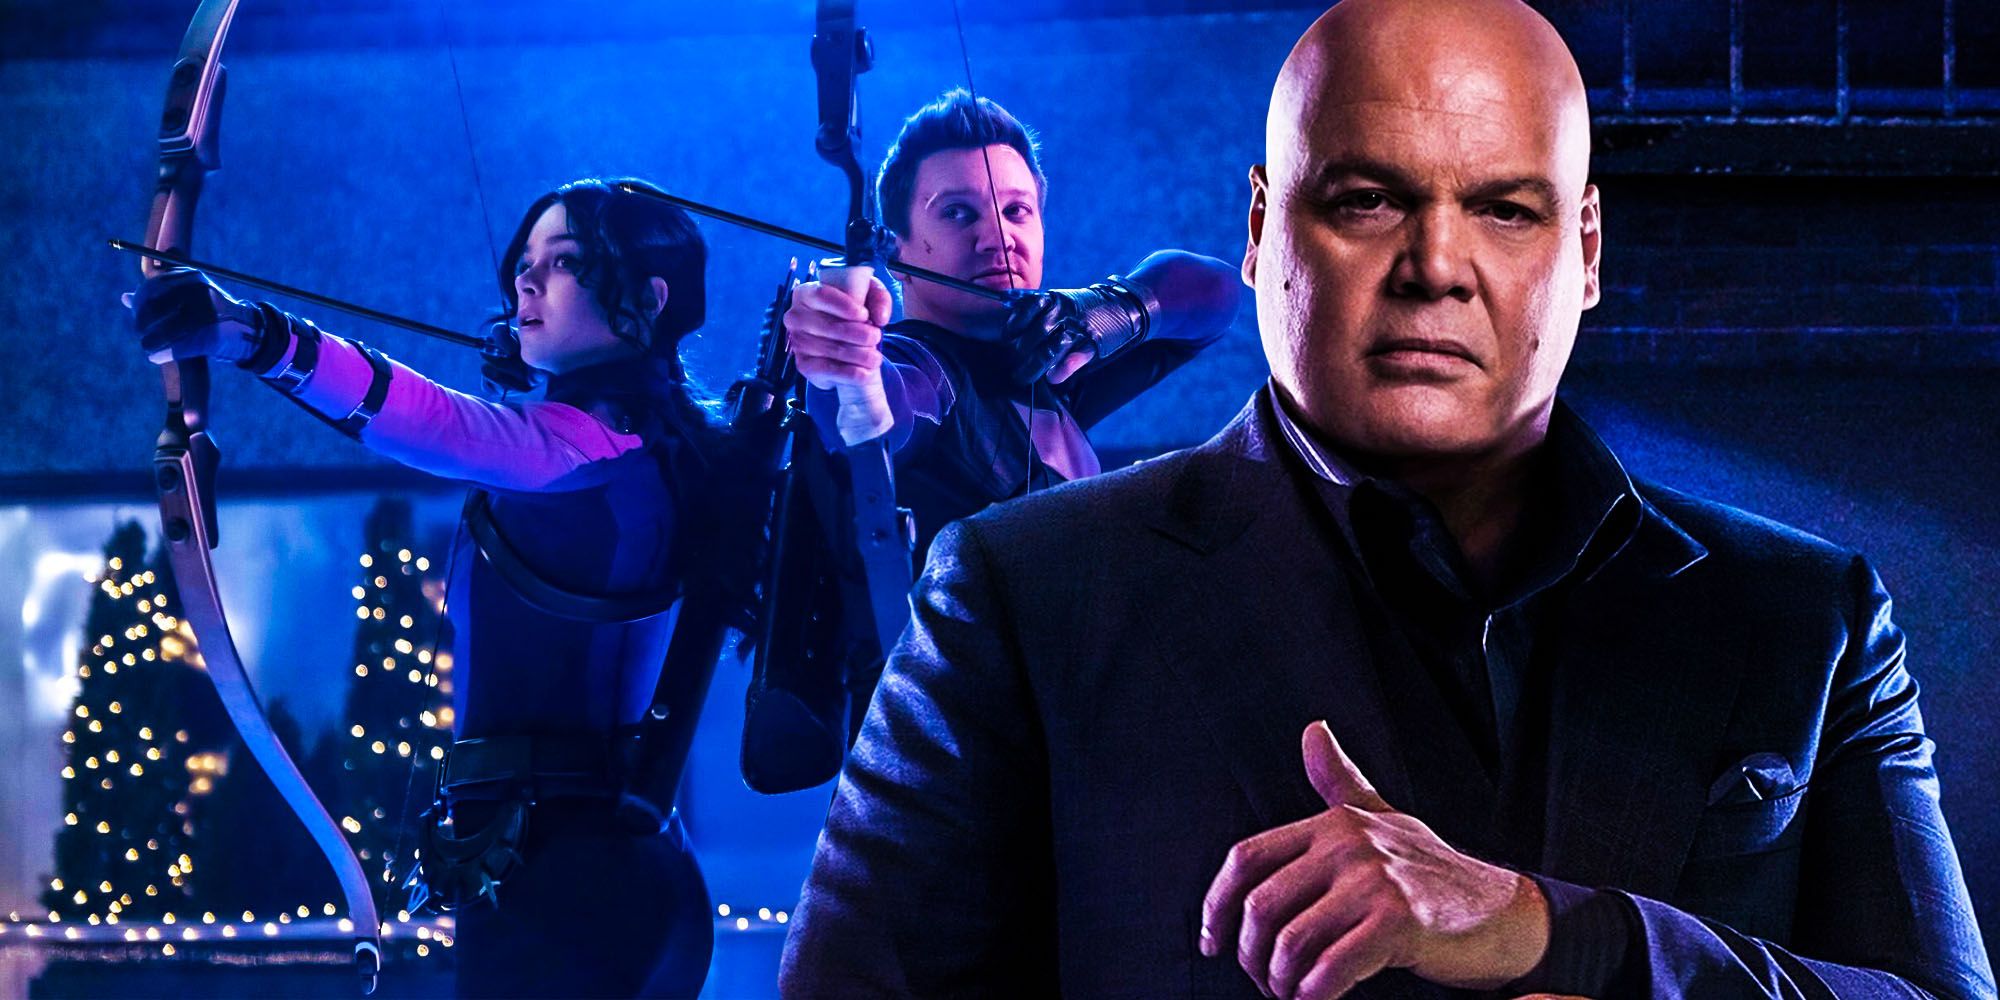 Hawkeye episode 3 confirms how powerful Kingpin really is